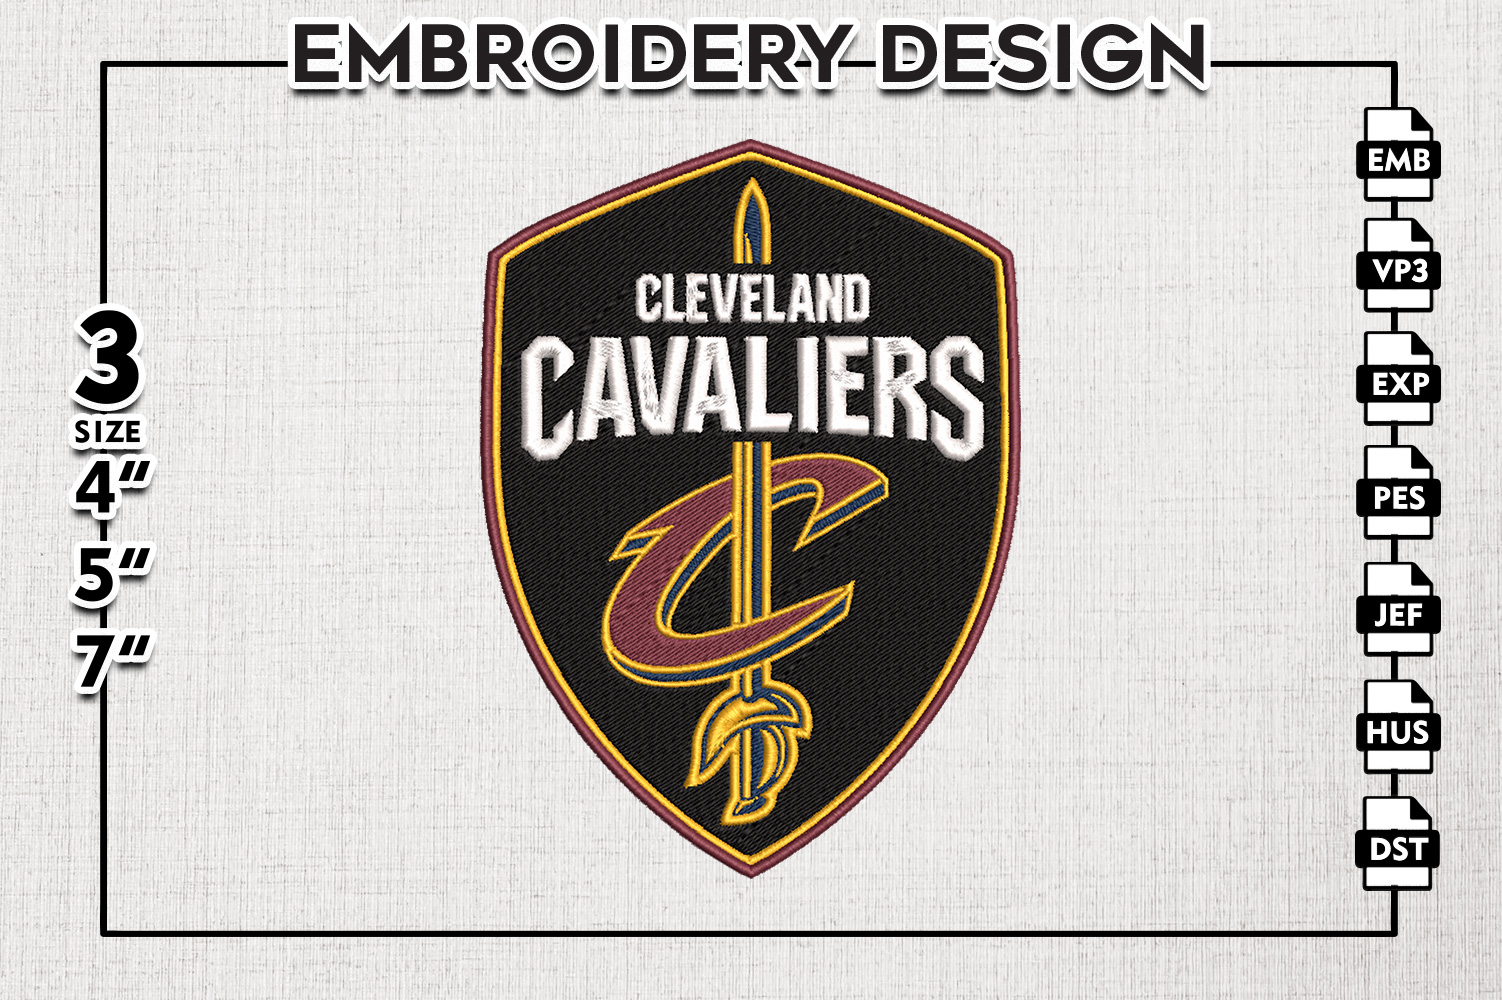 Cleveland Cavaliers Embroidery Design Download - EmbroideryDownload